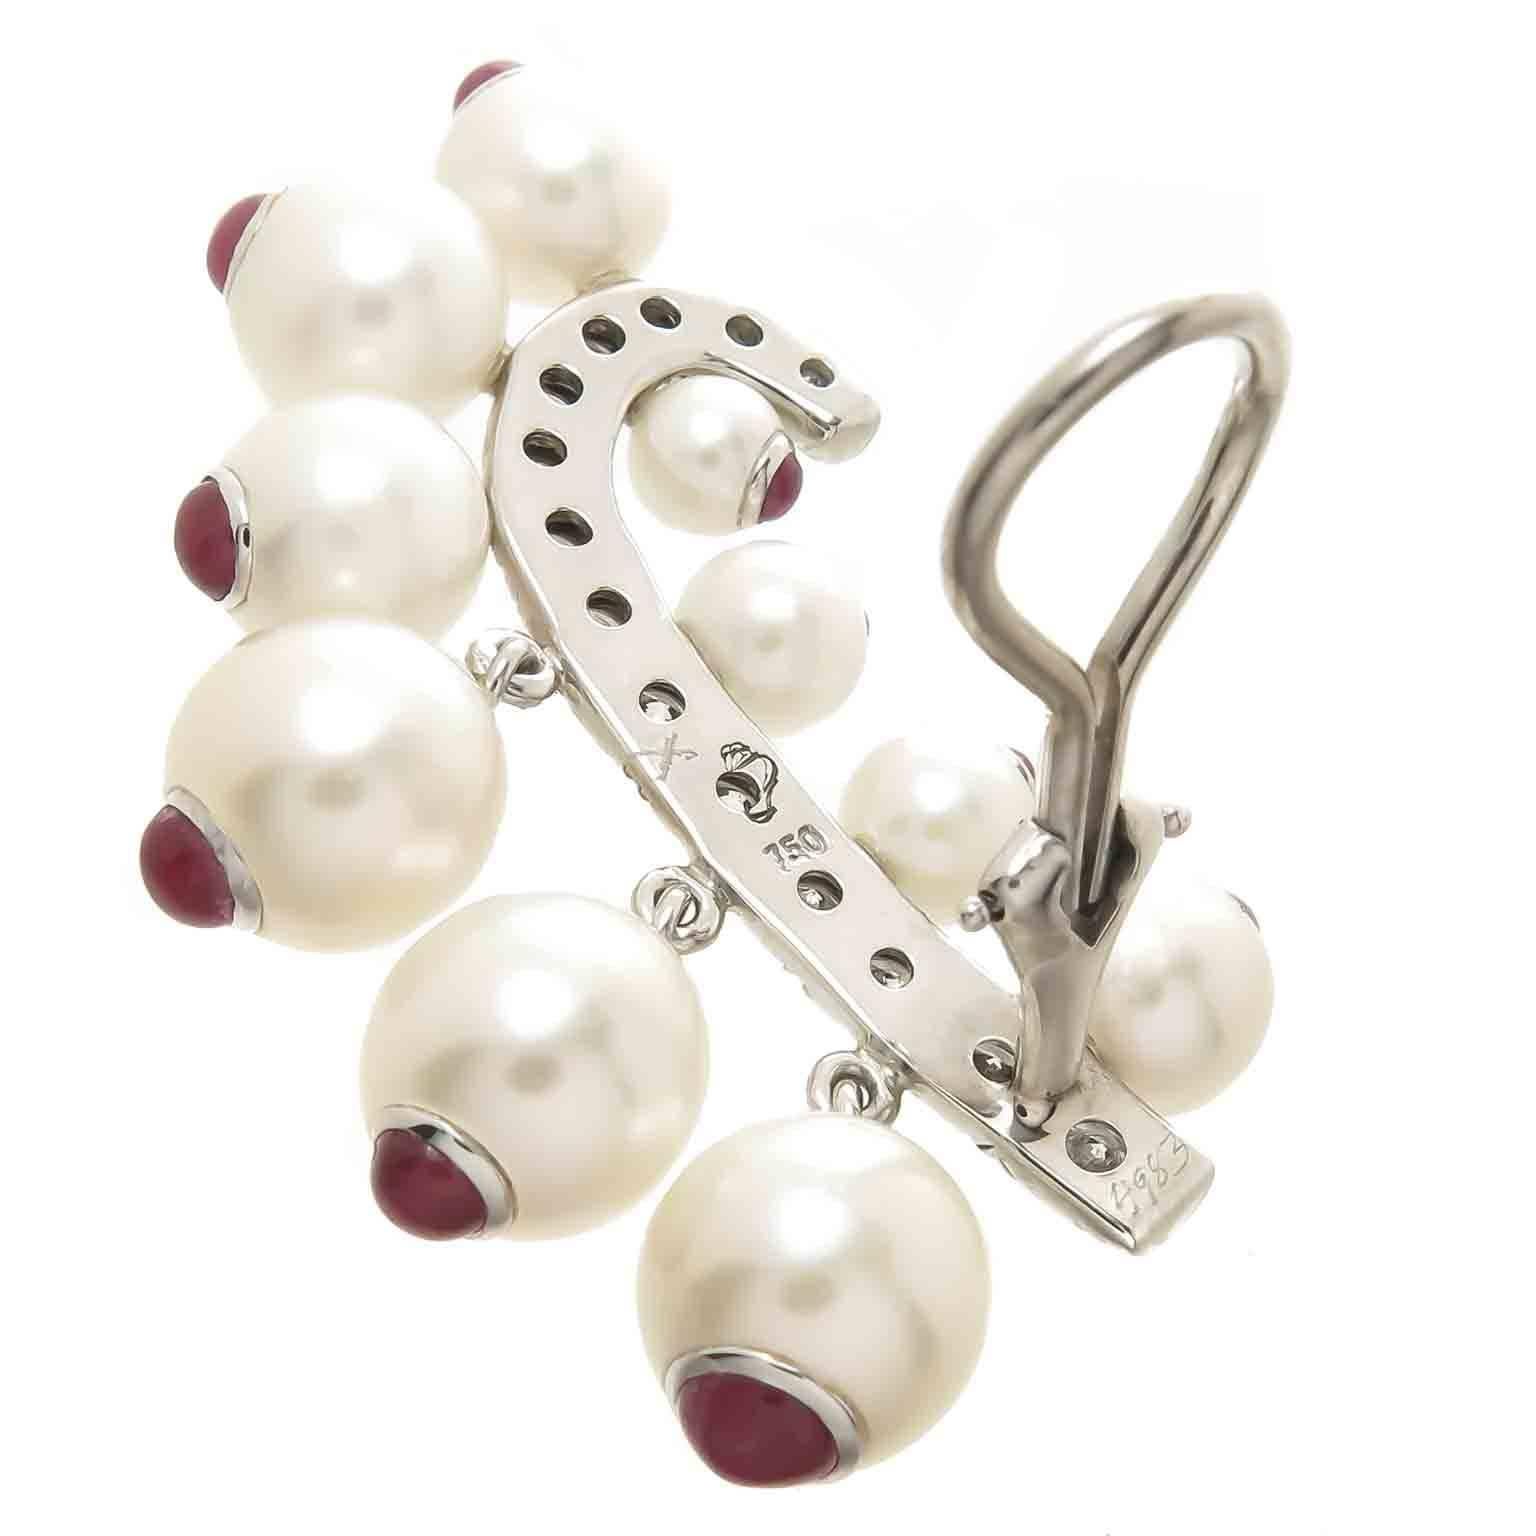 Circa 1960s Seaman schepps 18K White Gold Earrings, measuring 1 1/2 inch in length, set with Fine Cultured Pearls measuring in size from 8 to 3 MM and each has a Gold cap set with a Fine color Cabochon Ruby. Further set with Round Brilliant cut